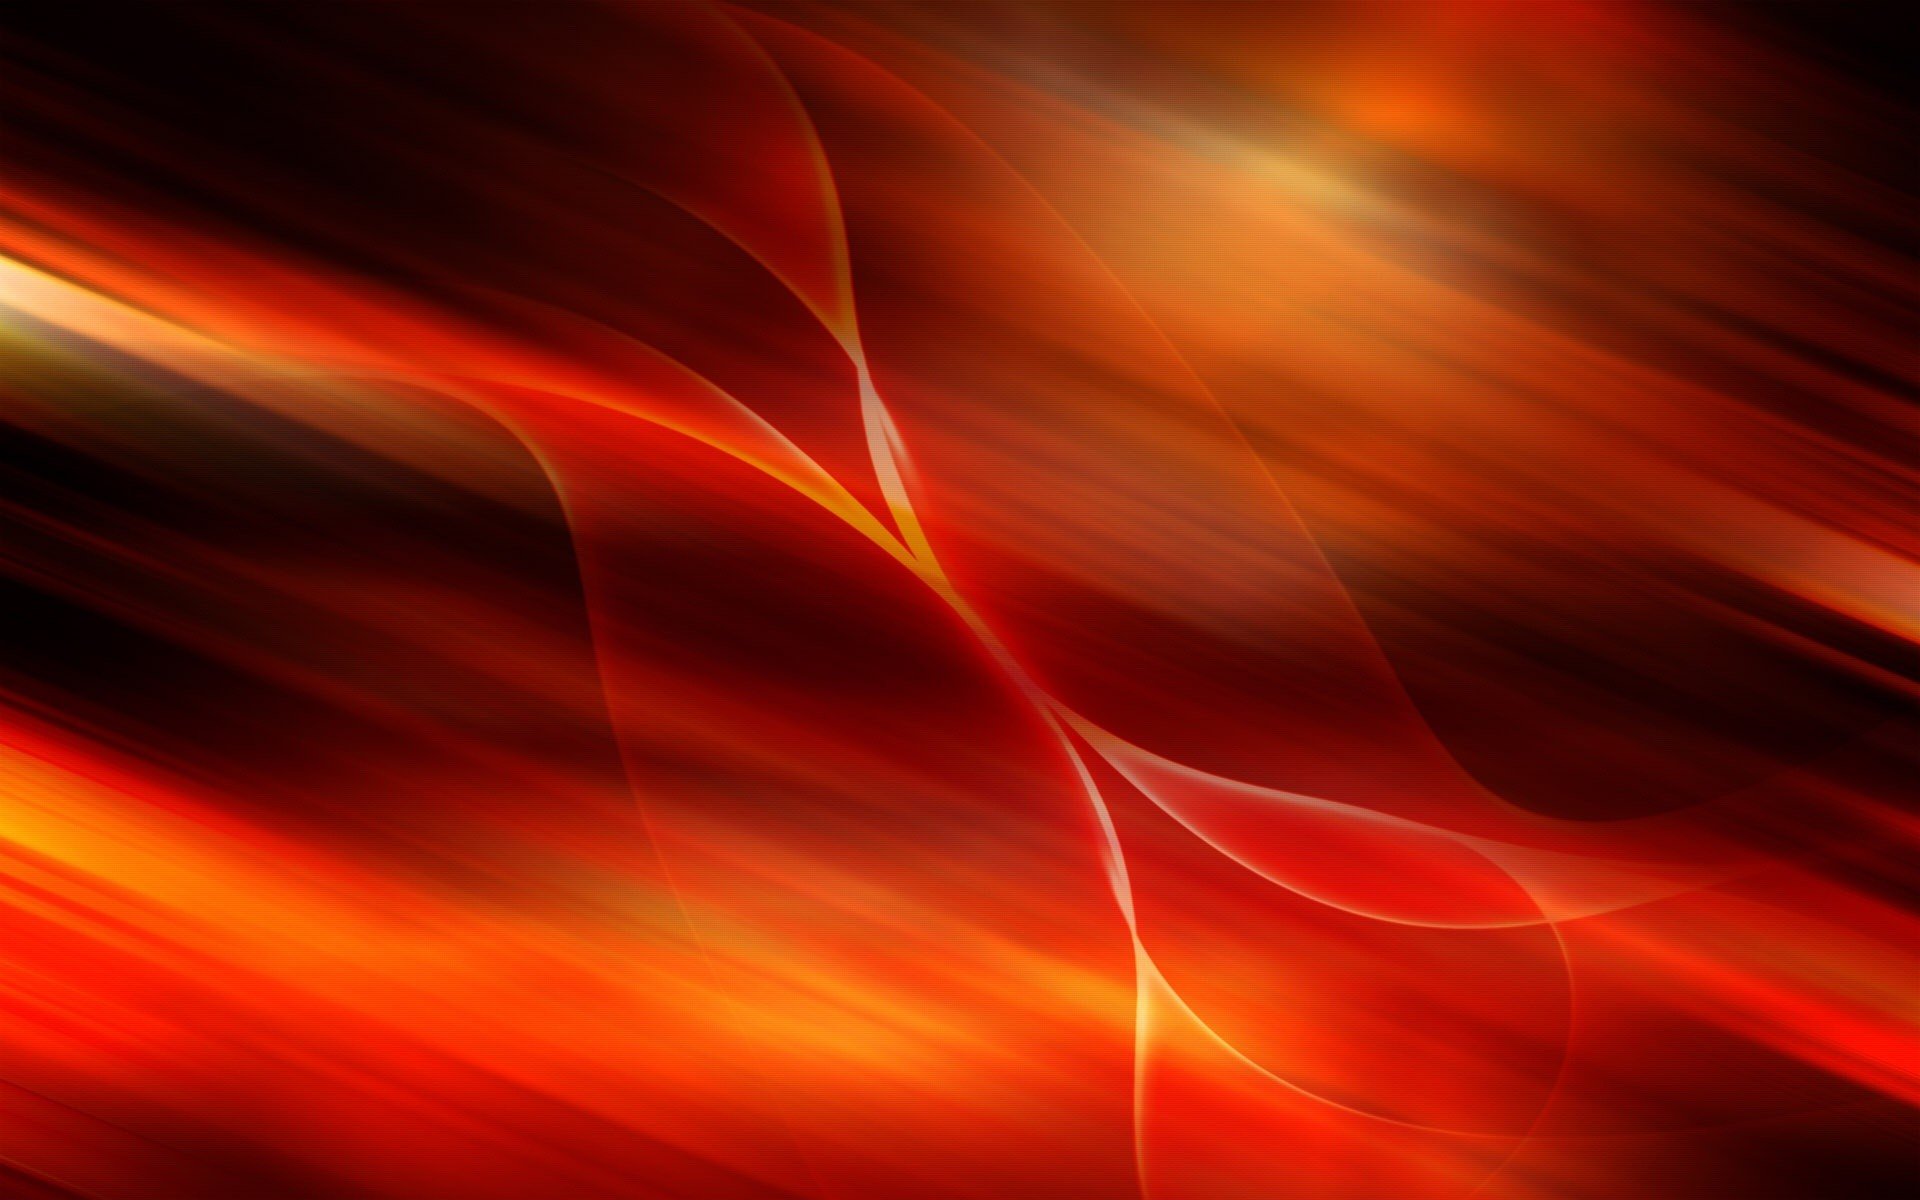 HD wallpaper Colorful Bright Orange Red orange color abstract  backgrounds  Wallpaper Flare